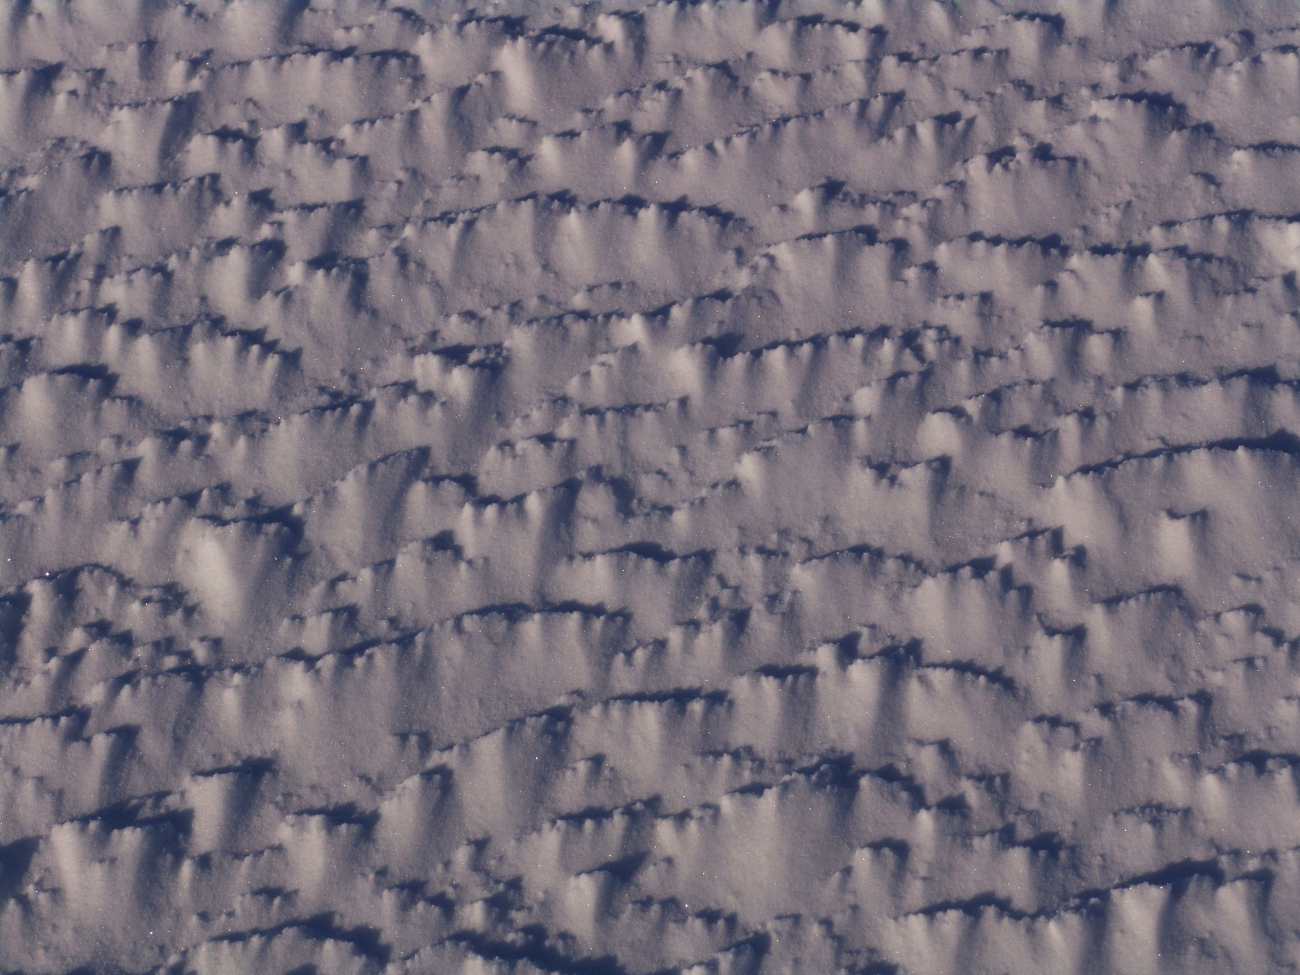 Mini-ridges of ice crystals covered by snow and ice pellets overlying ice pack